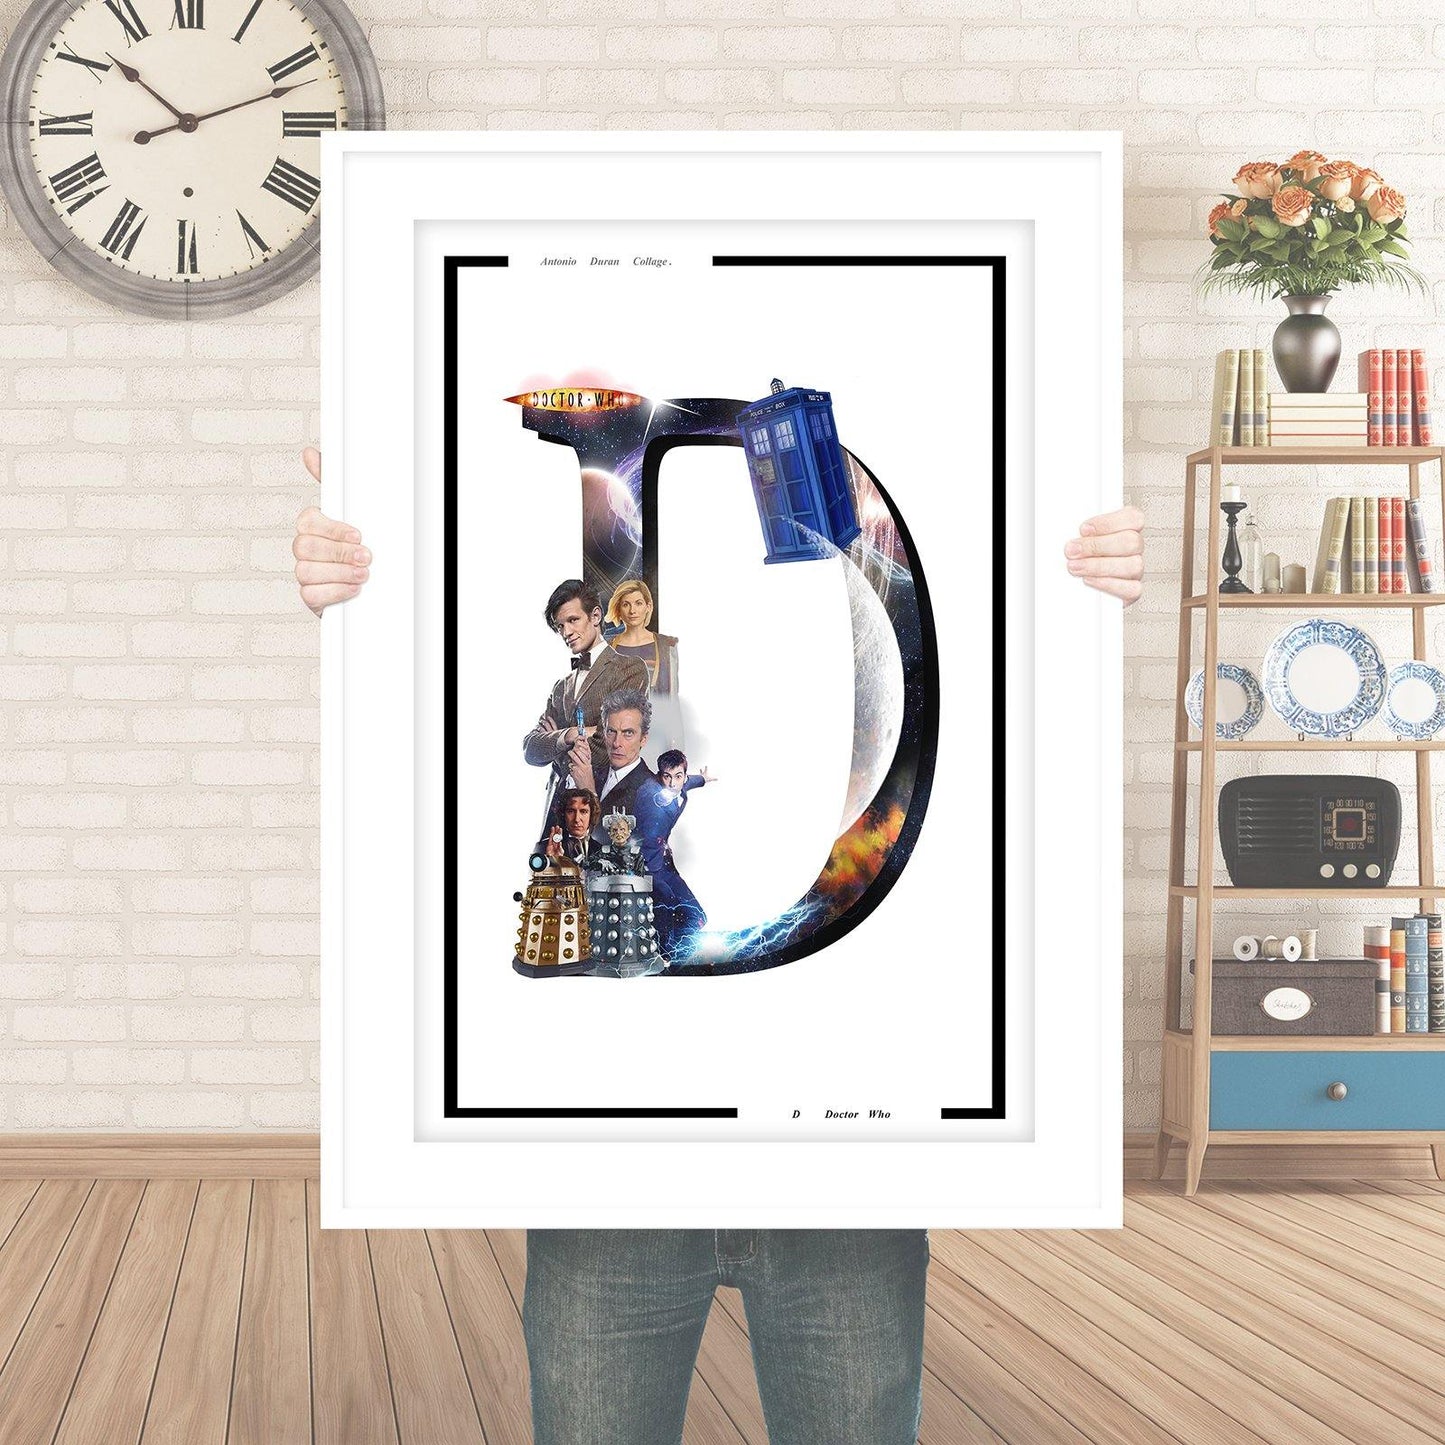 Posters UK are the best quality in the market, with the most precise colour accuracy and precise detail. They make perfect gifts, or they look great hung up in any home. Our latest stock is of Doctor Who Movie posters – choose from the full collection now! 98types of wall Art